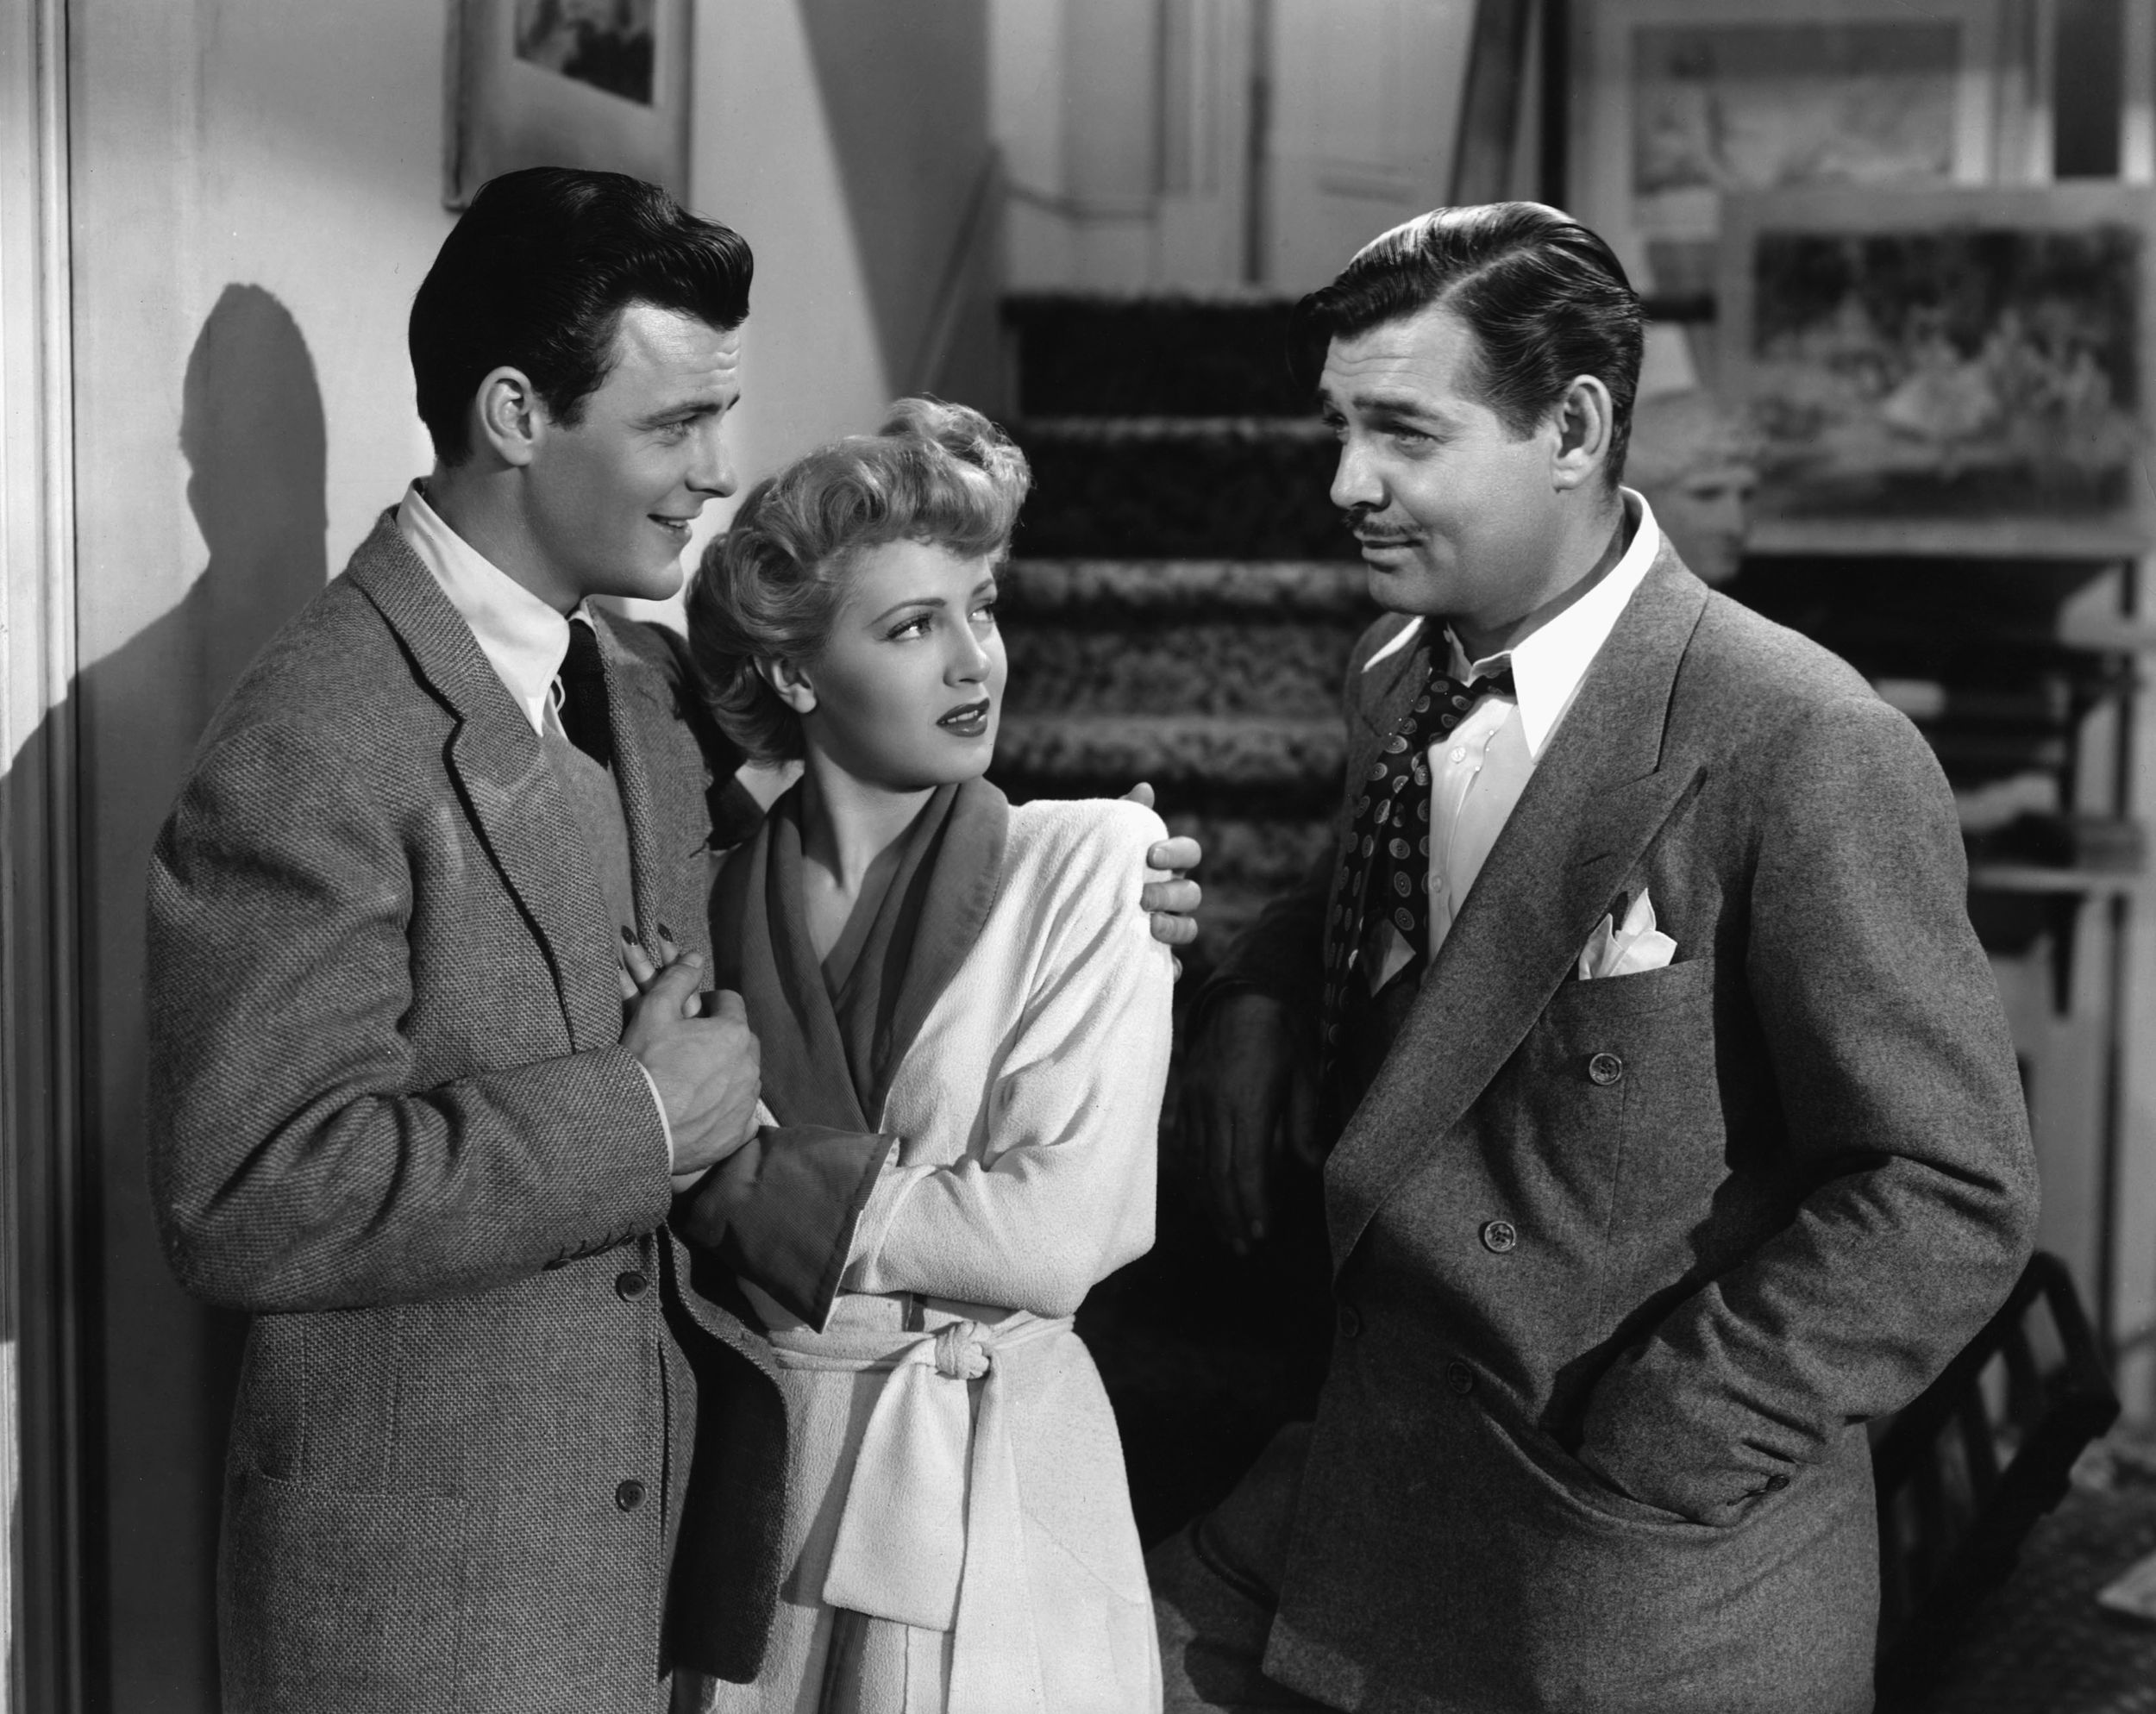 Lana Turner and Clark Gable play intrepid newspaper reporters in Somewhere I’ll Find You.